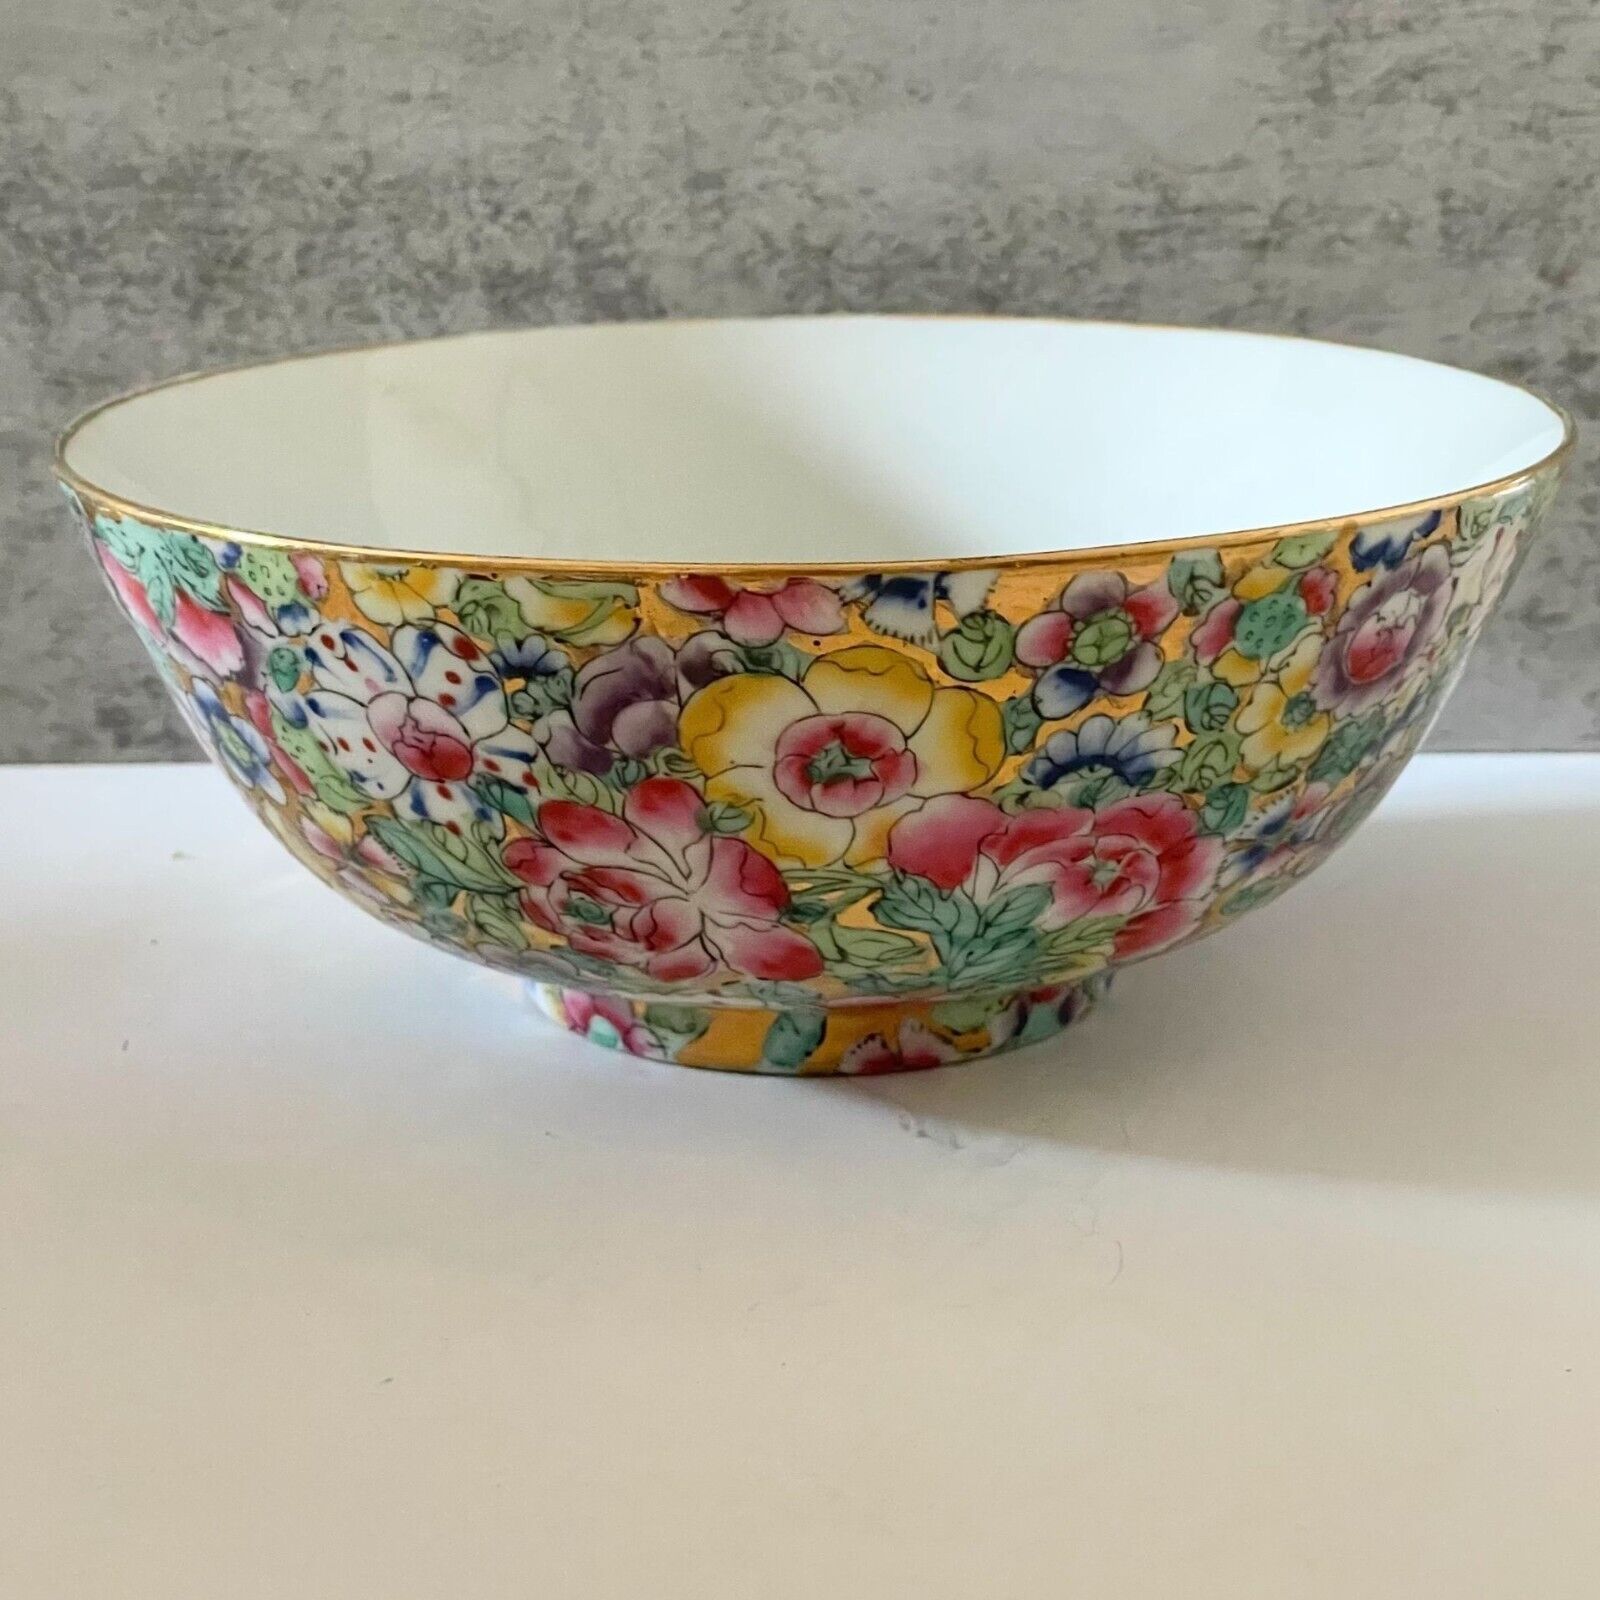 Vintage Y.Y. Japanese Porcelain Ware Decorated Hong Kong Floral Chinoiserie Bowl